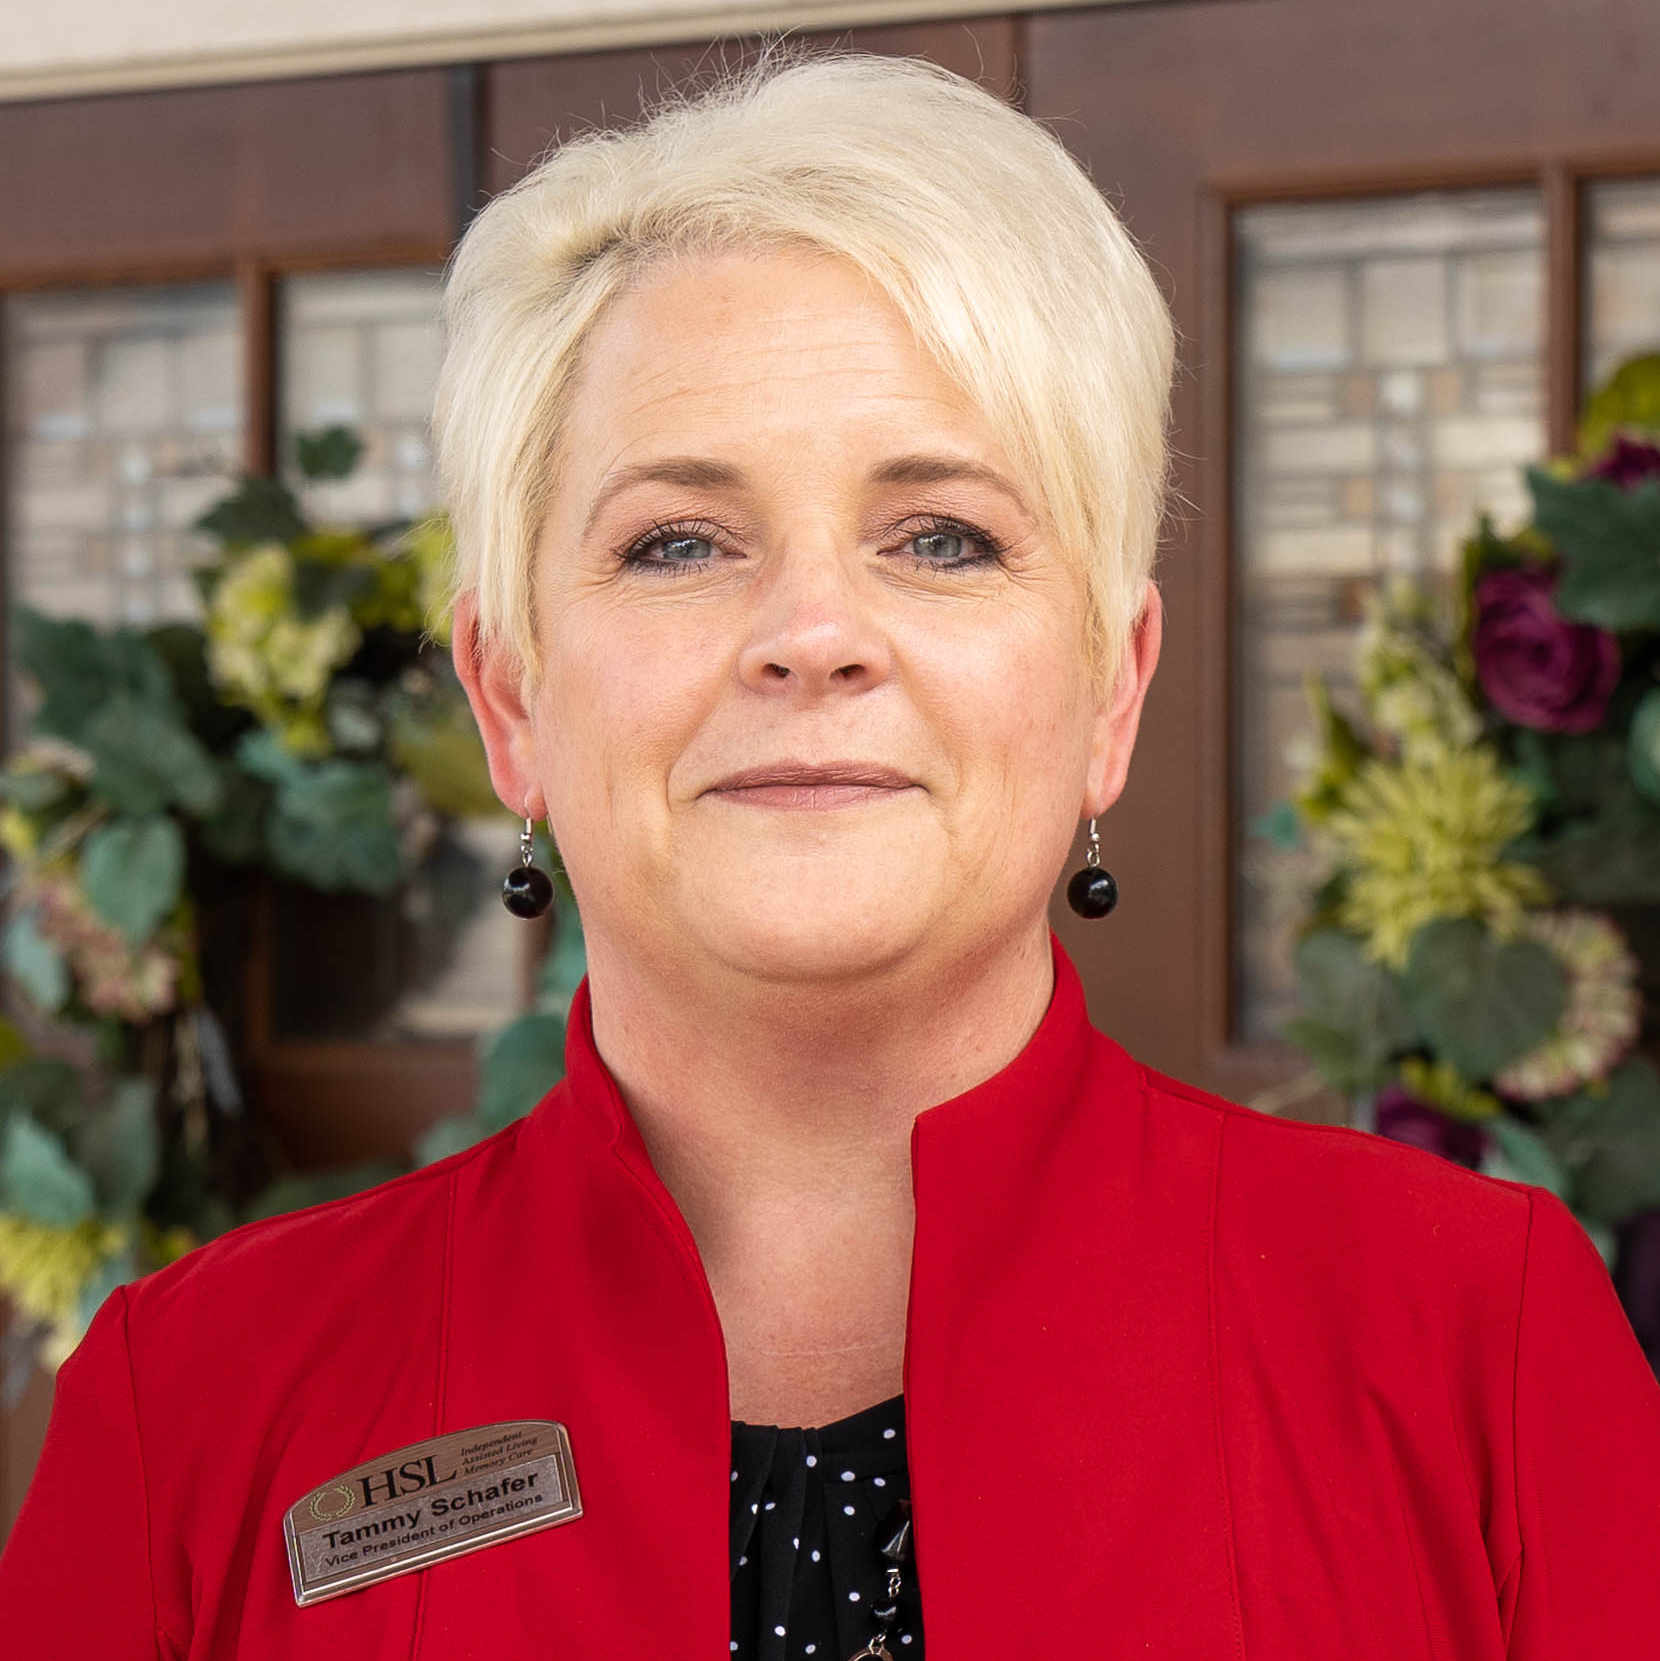 Heritage Senior Living names Tammy Schafer  as new Vice President of Operations